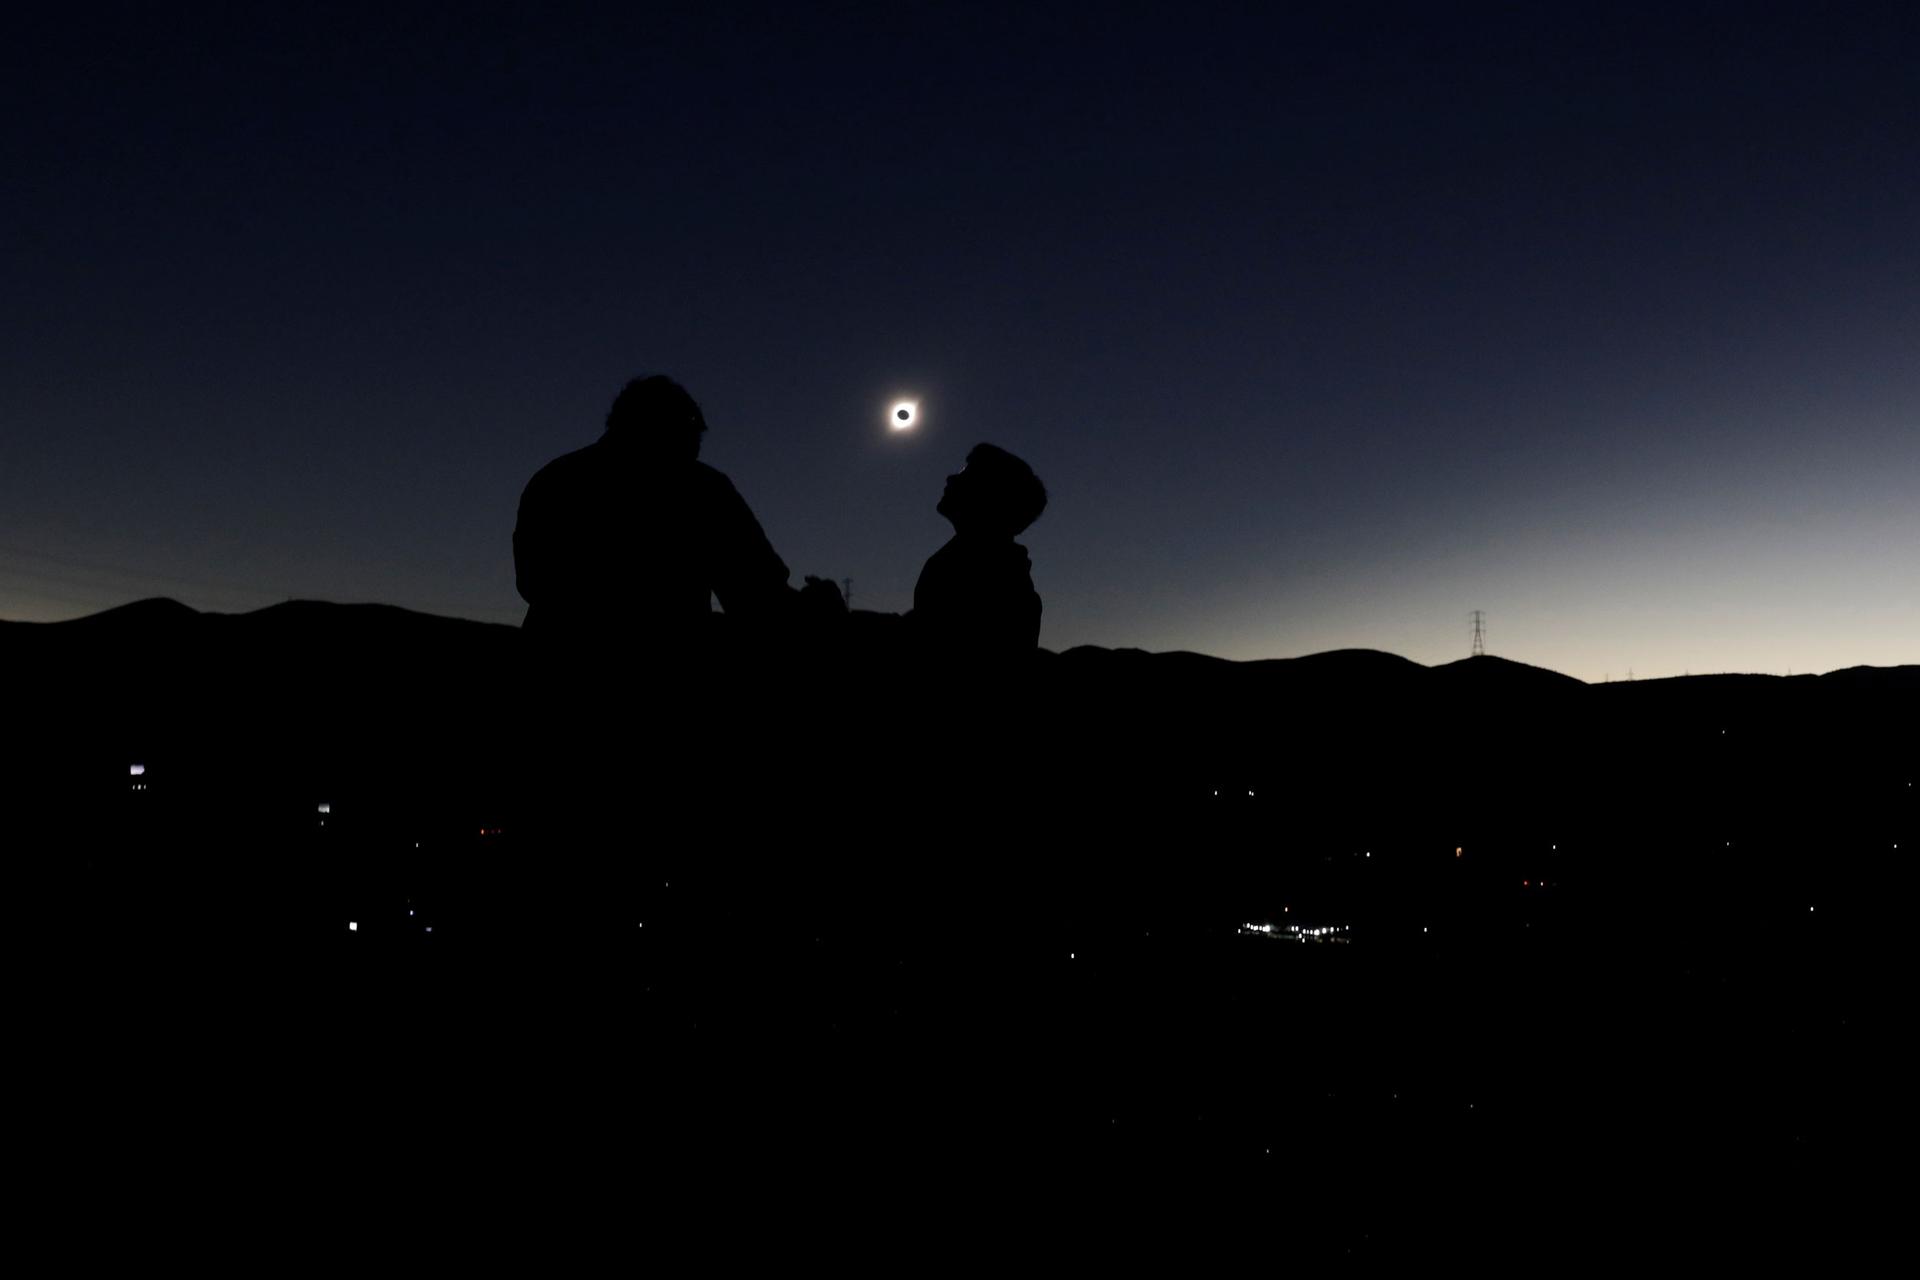 A solar eclipse is shown in the distance framed between two people in the nearground in shadow.